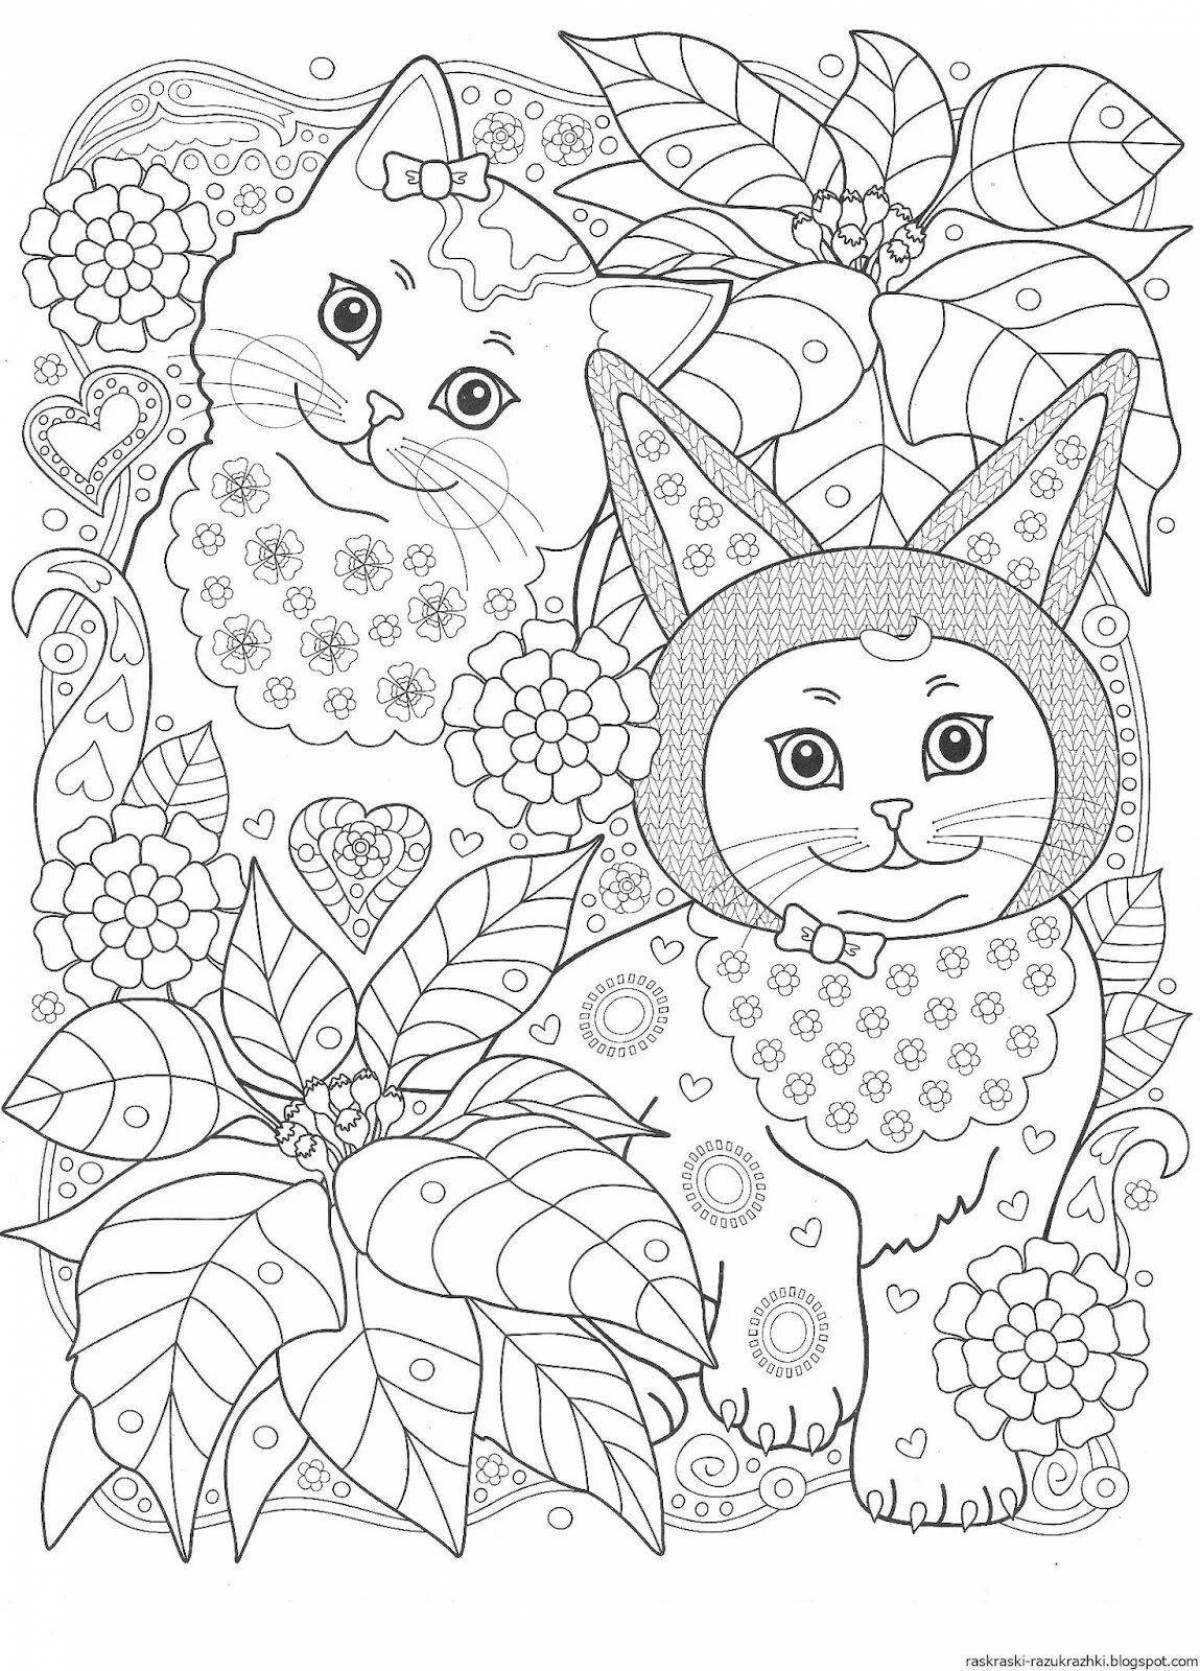 Snuggly coloring page anti-stress kitten